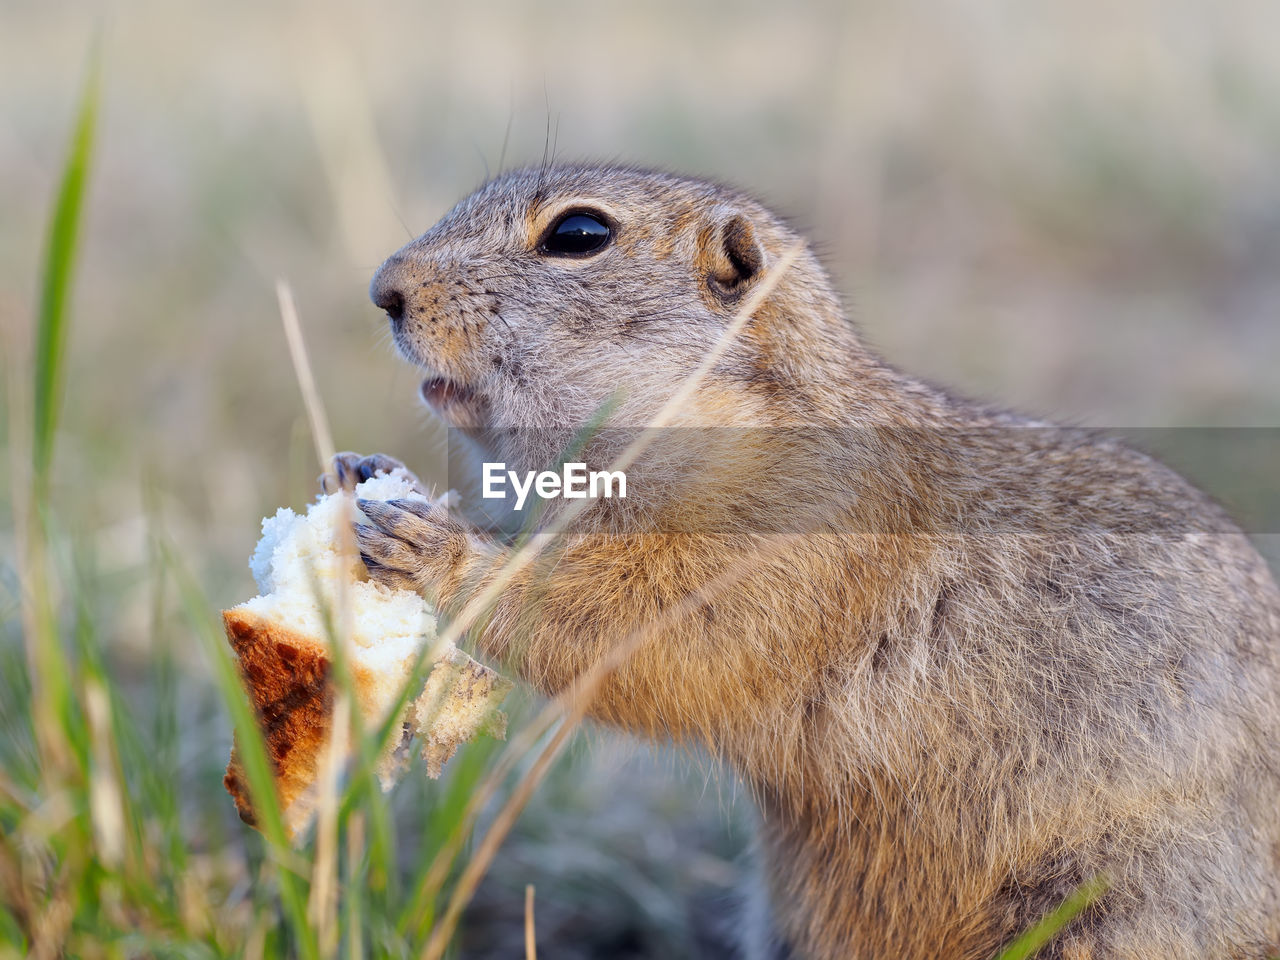 animal, animal themes, animal wildlife, one animal, wildlife, squirrel, mammal, whiskers, eating, rodent, prairie dog, food, no people, nature, food and drink, close-up, side view, focus on foreground, chipmunk, day, outdoors, feeding, plant, grass, profile view